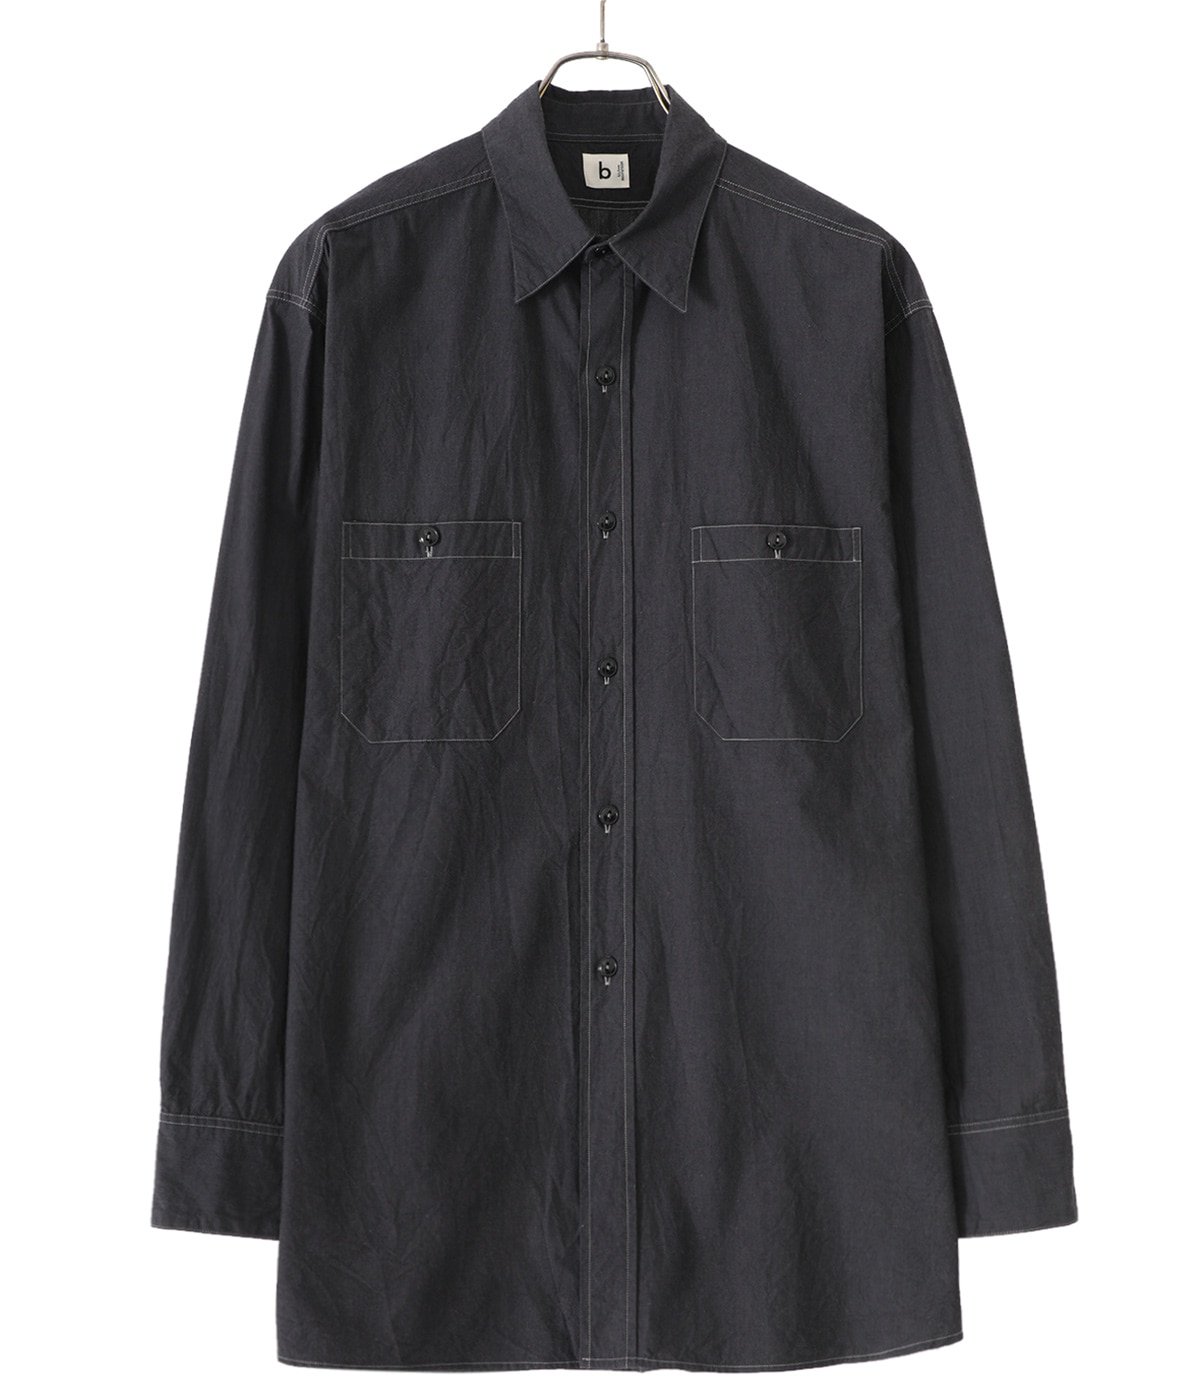 Selvage Chambray USN Shirt | blurhmsROOTSTOCK(ブラームス